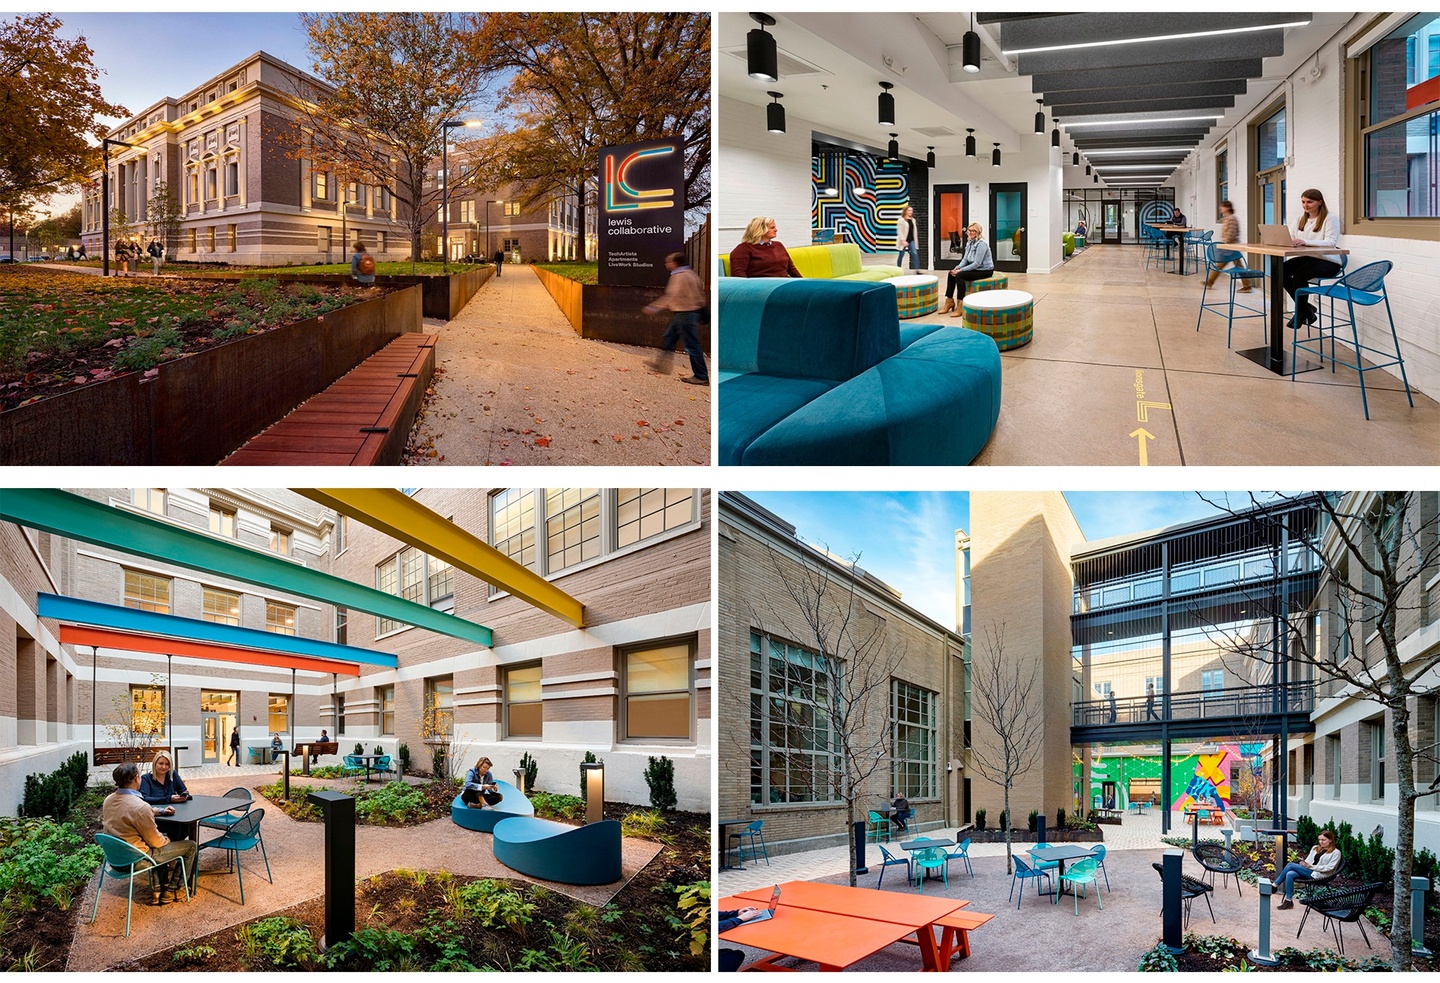 Grid of four perspective renderings of the Lewis Center - the facade, an interior common space, and two exterior courtyards.